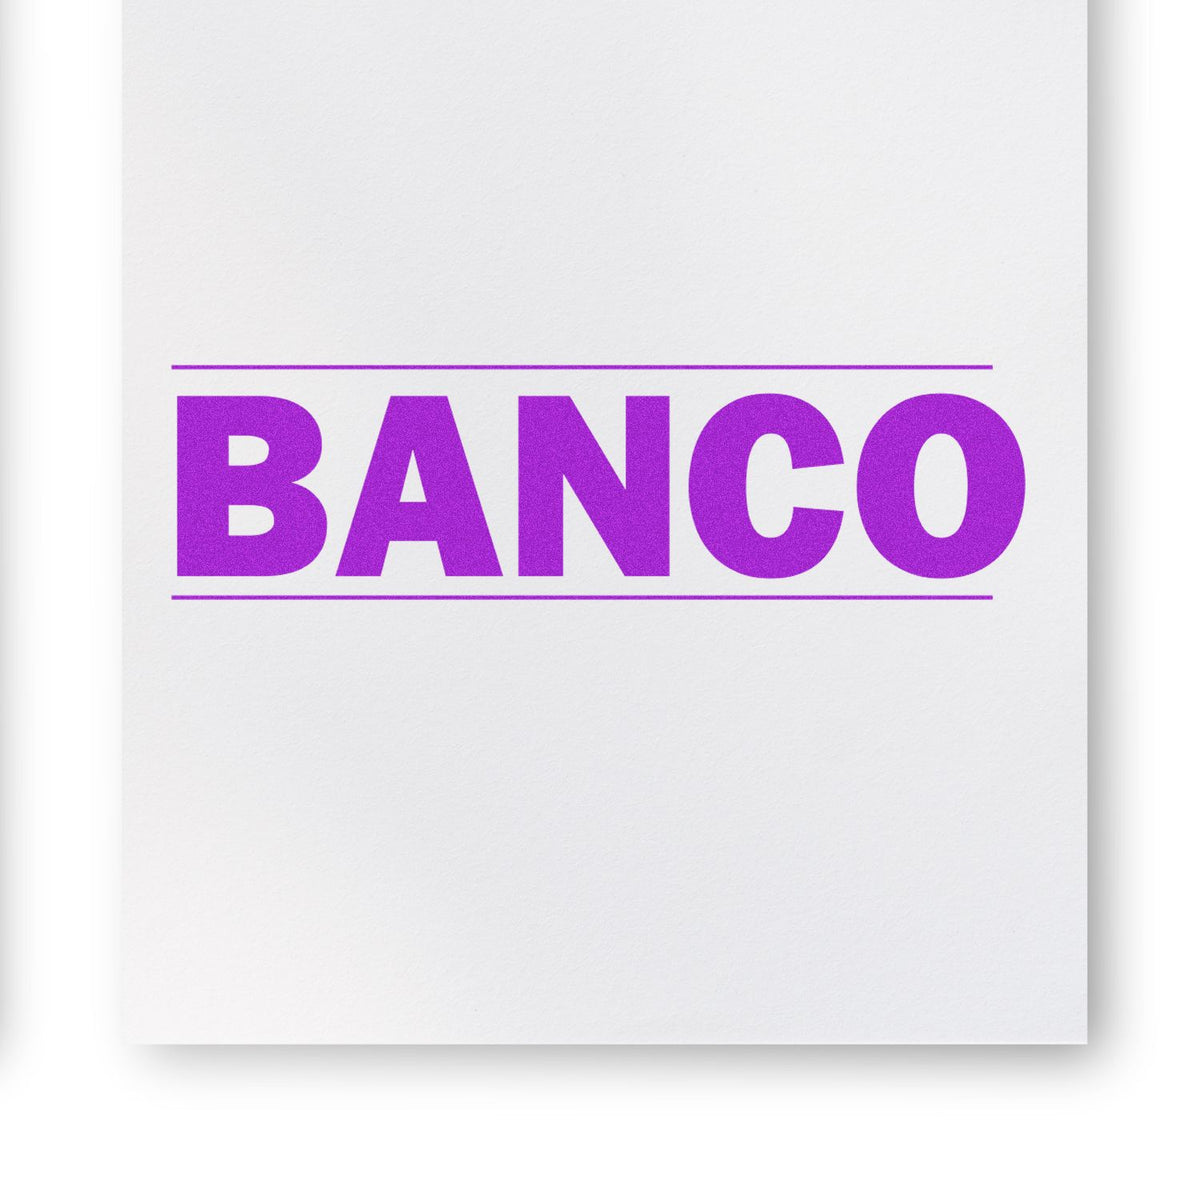 Bold Banco Rubber Stamp In Use